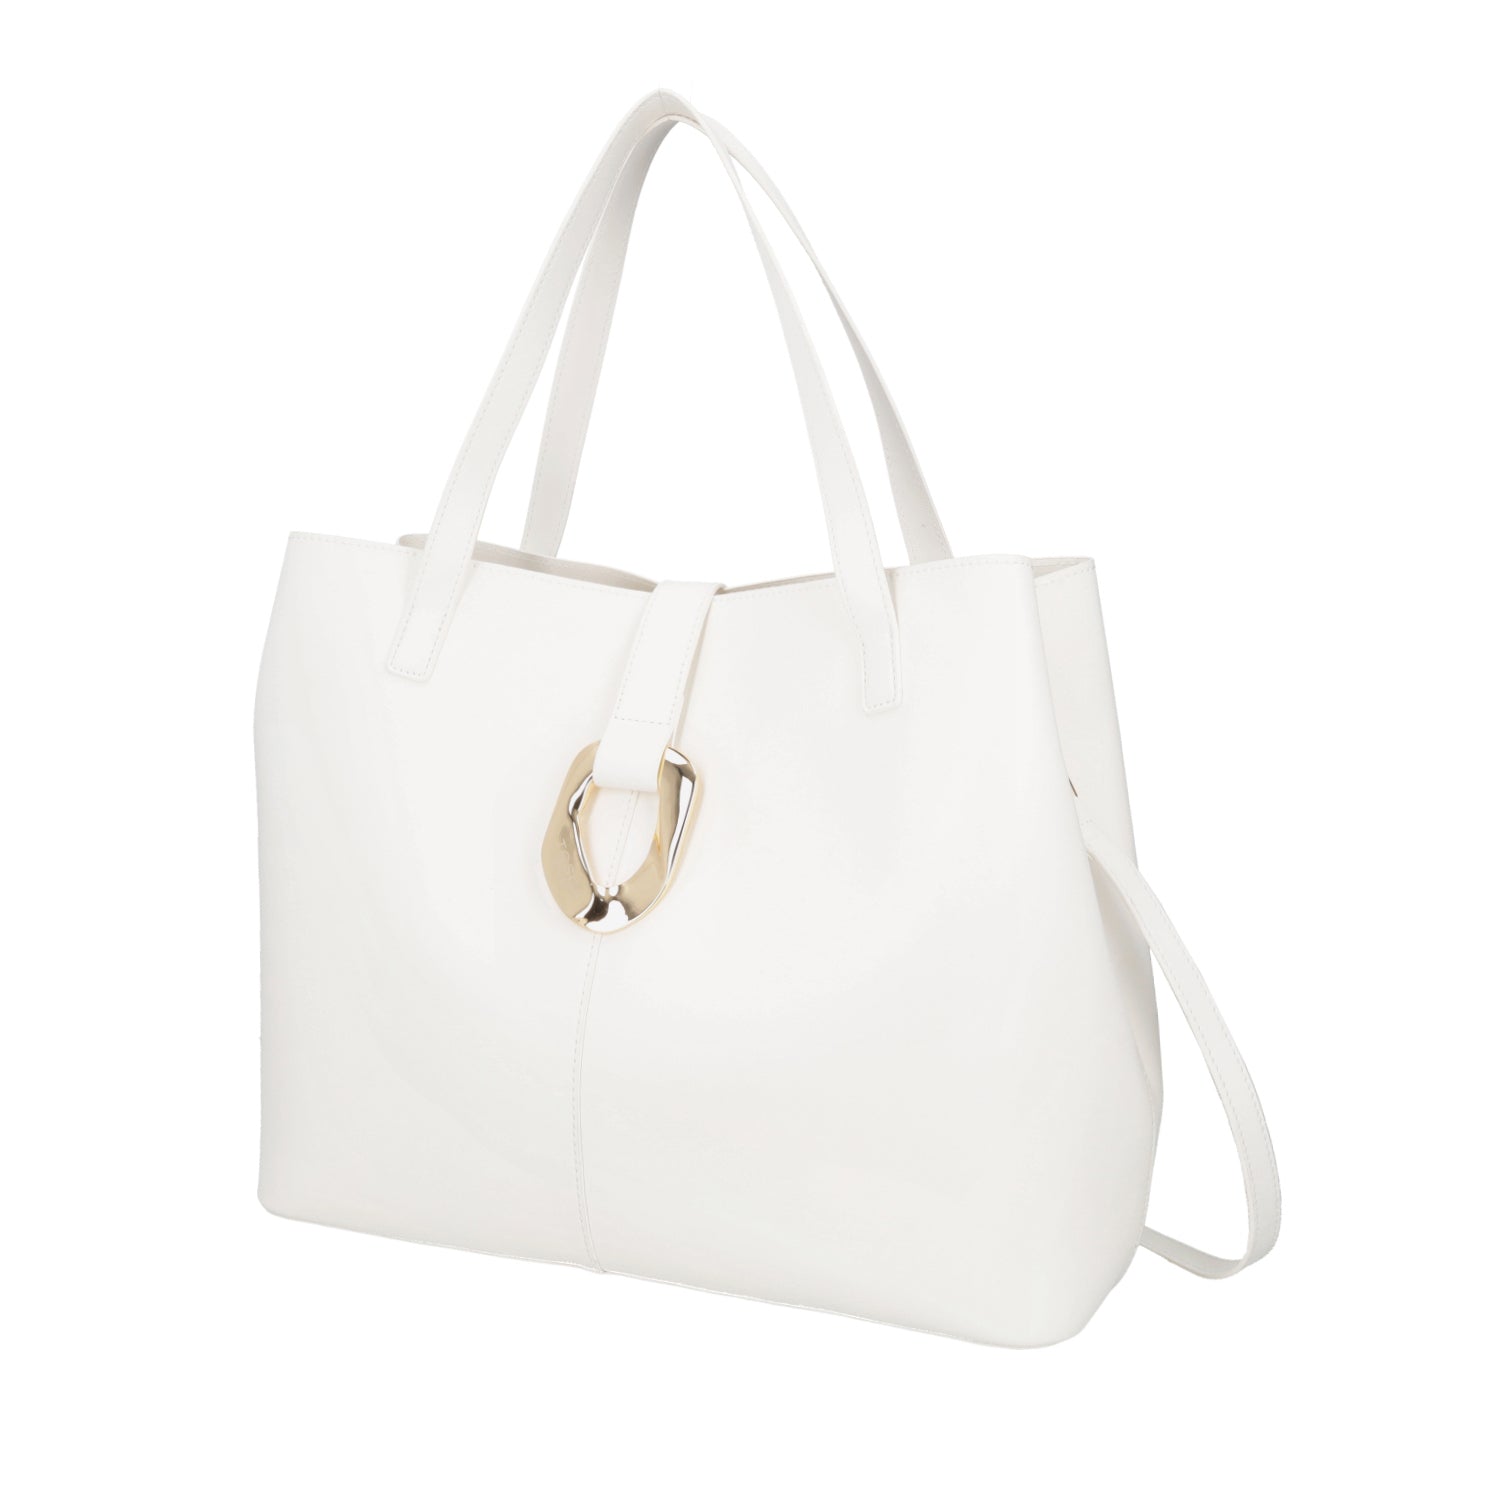 WHITE PRIMULA SHOPPING BAG WITH GOLDEN ACCESSORY